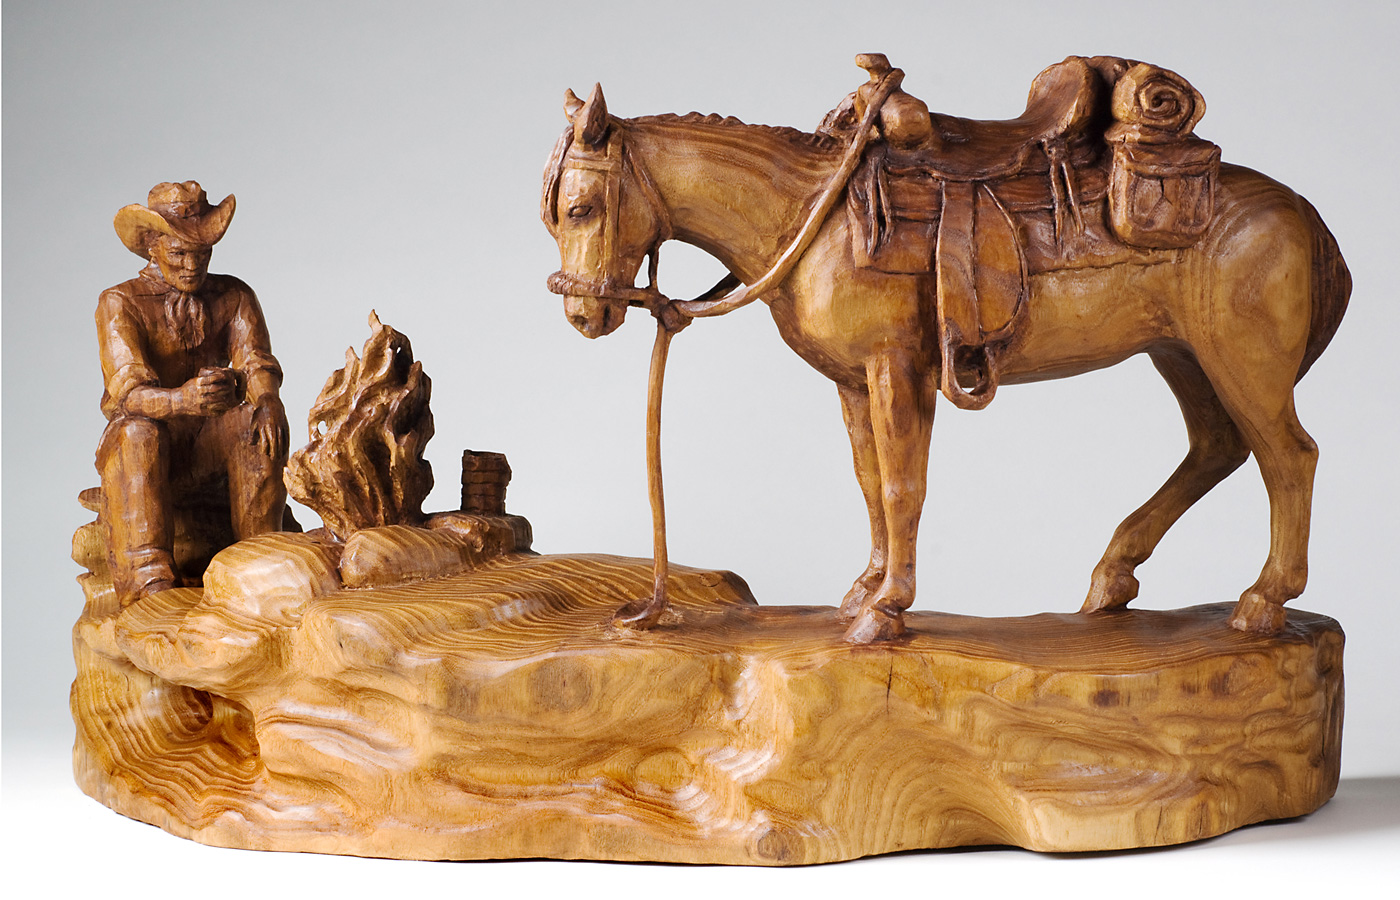 The Best Wood Sculptures in the World International Woodcarvers